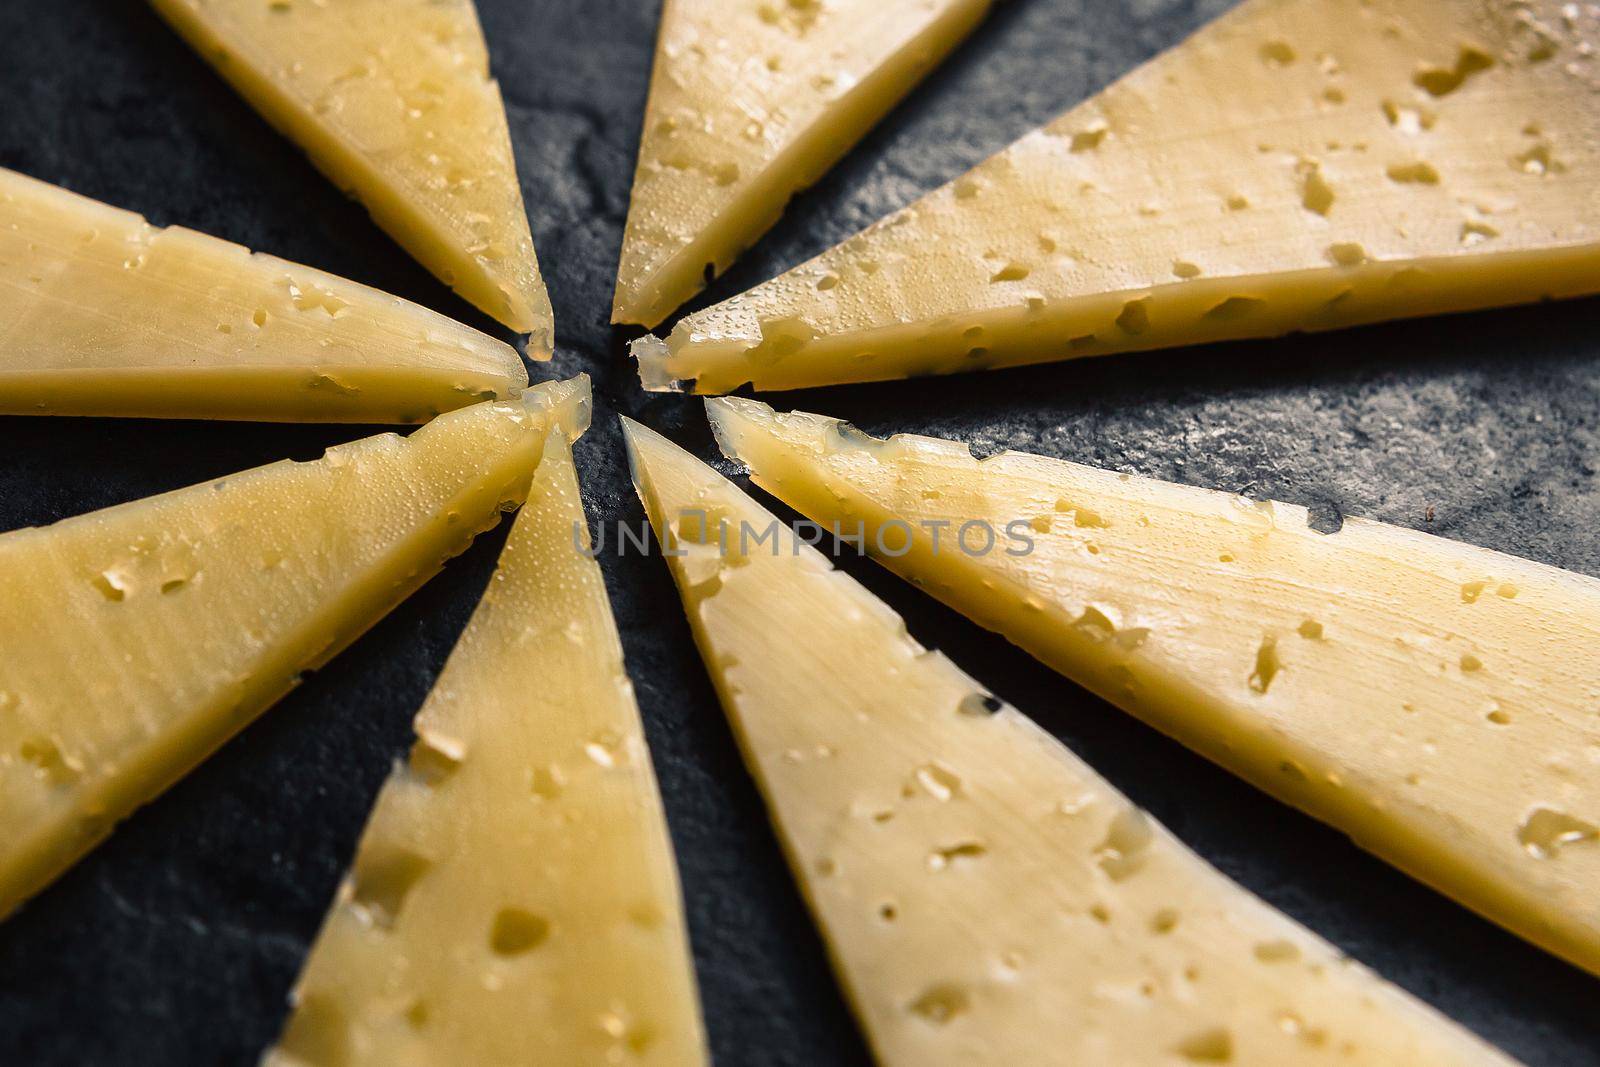 Pieces of cheese are laid out in the form of sunlight on a black cast-iron surface.